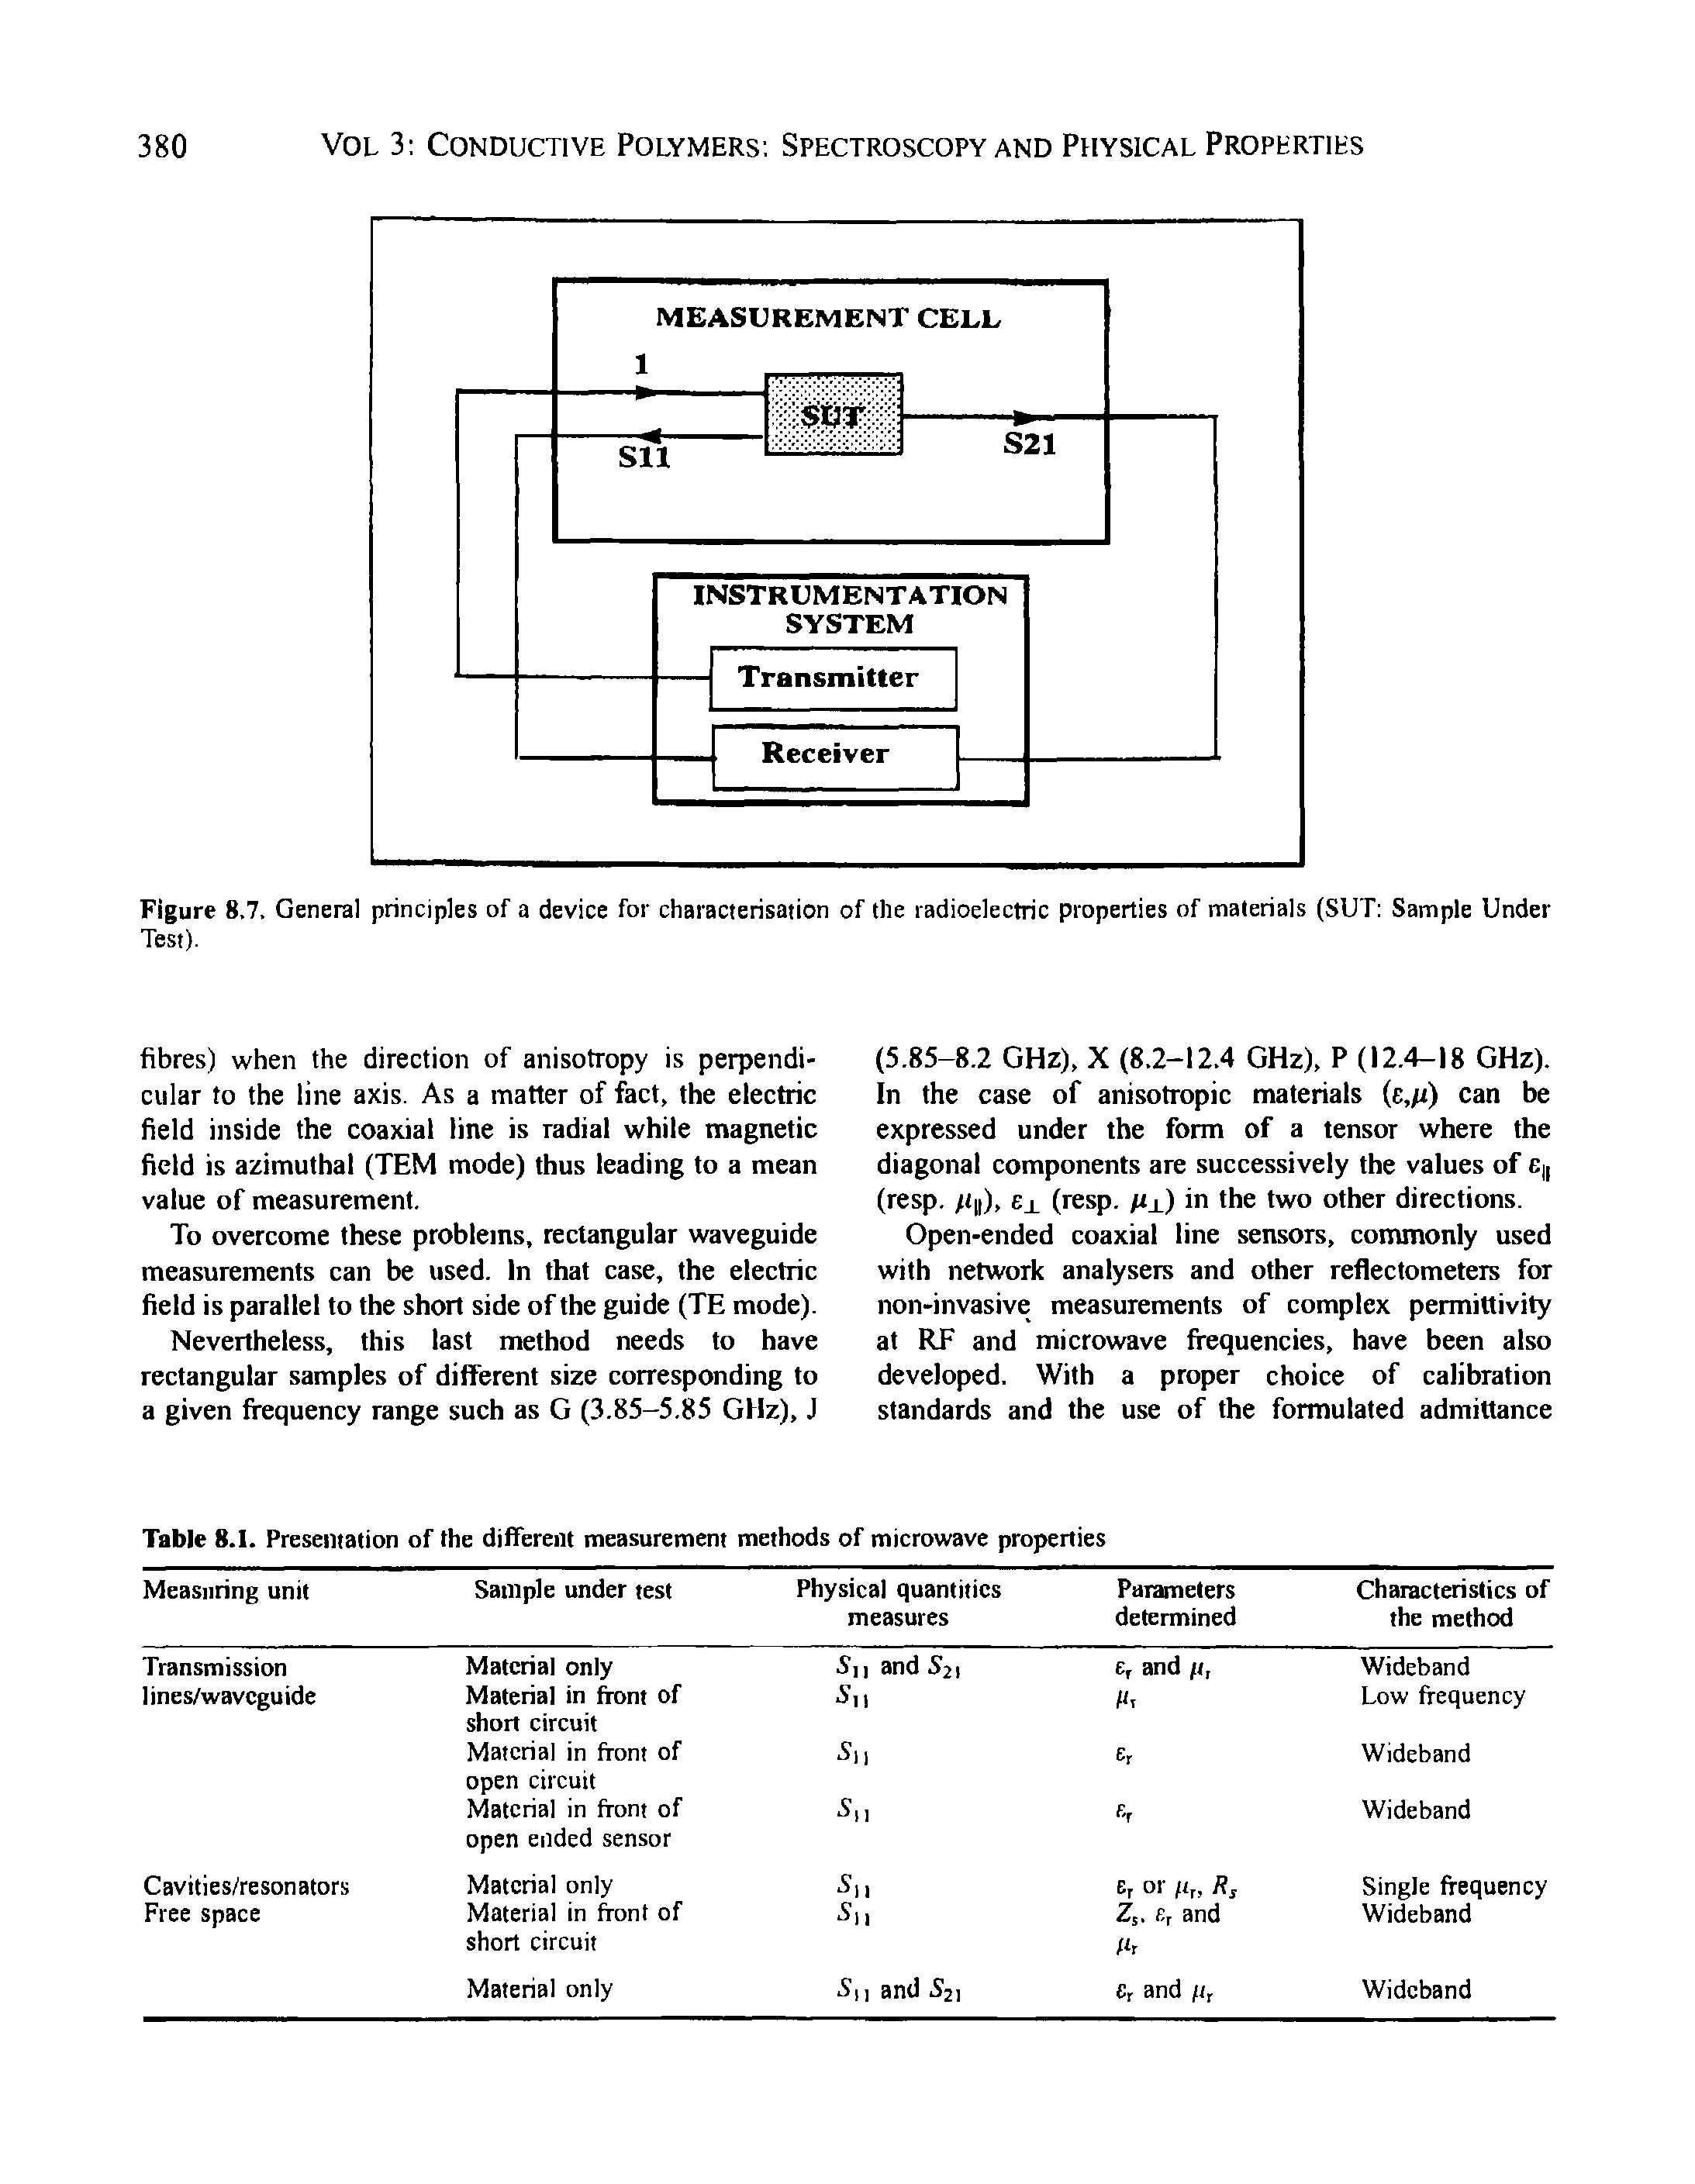 Figure 8.7. General principles of a device for characterisation of the radioelectric properties of materials (SUT Sample Under Test).